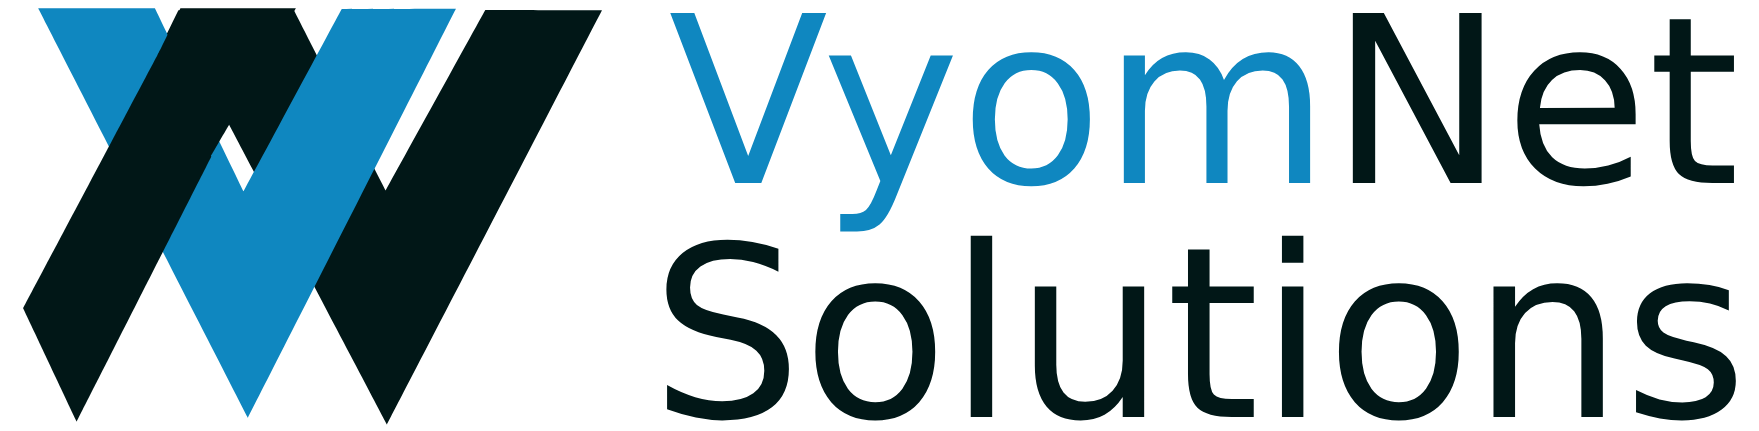 VyomNet Solutions